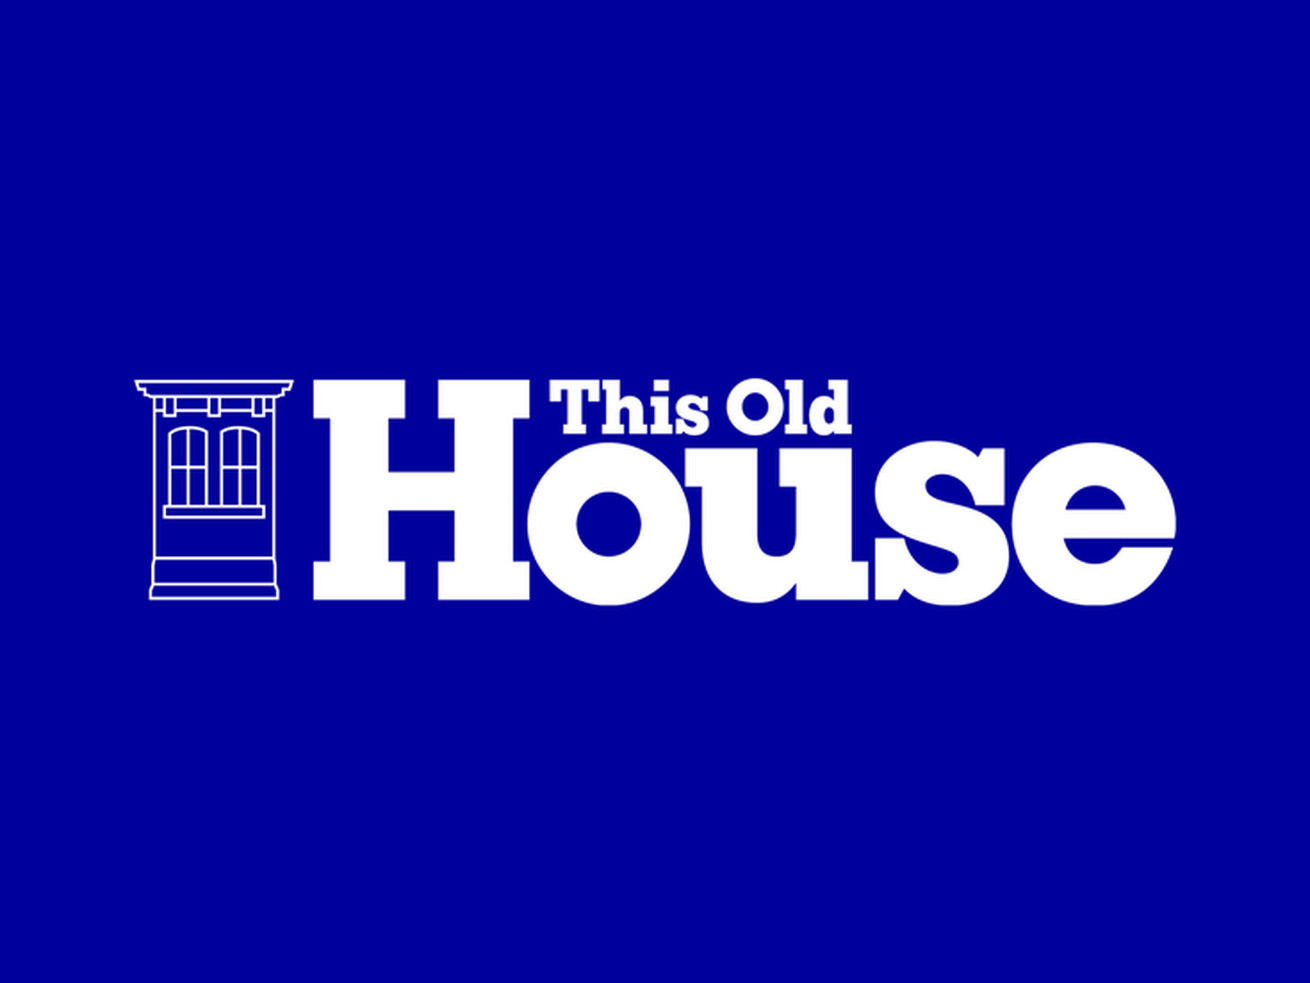 About This Old House